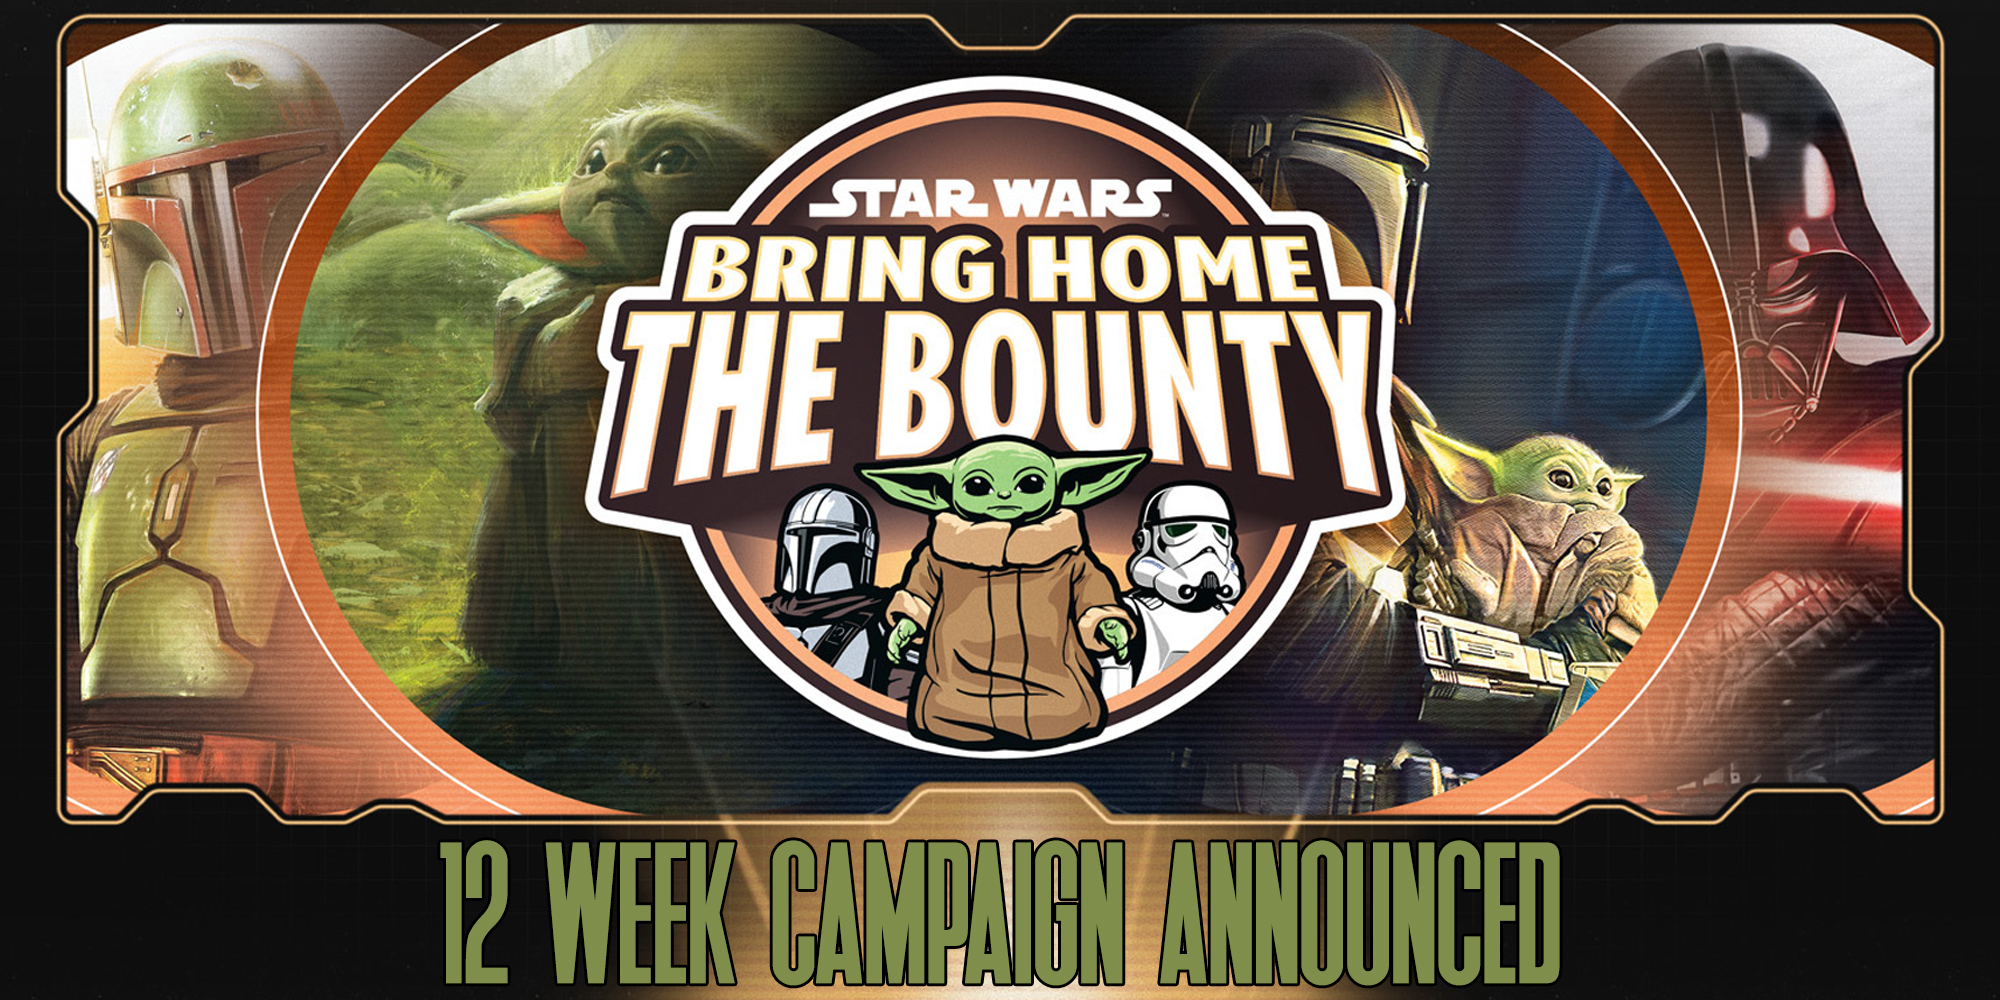 Bring Home The Bounty Campaign Announced